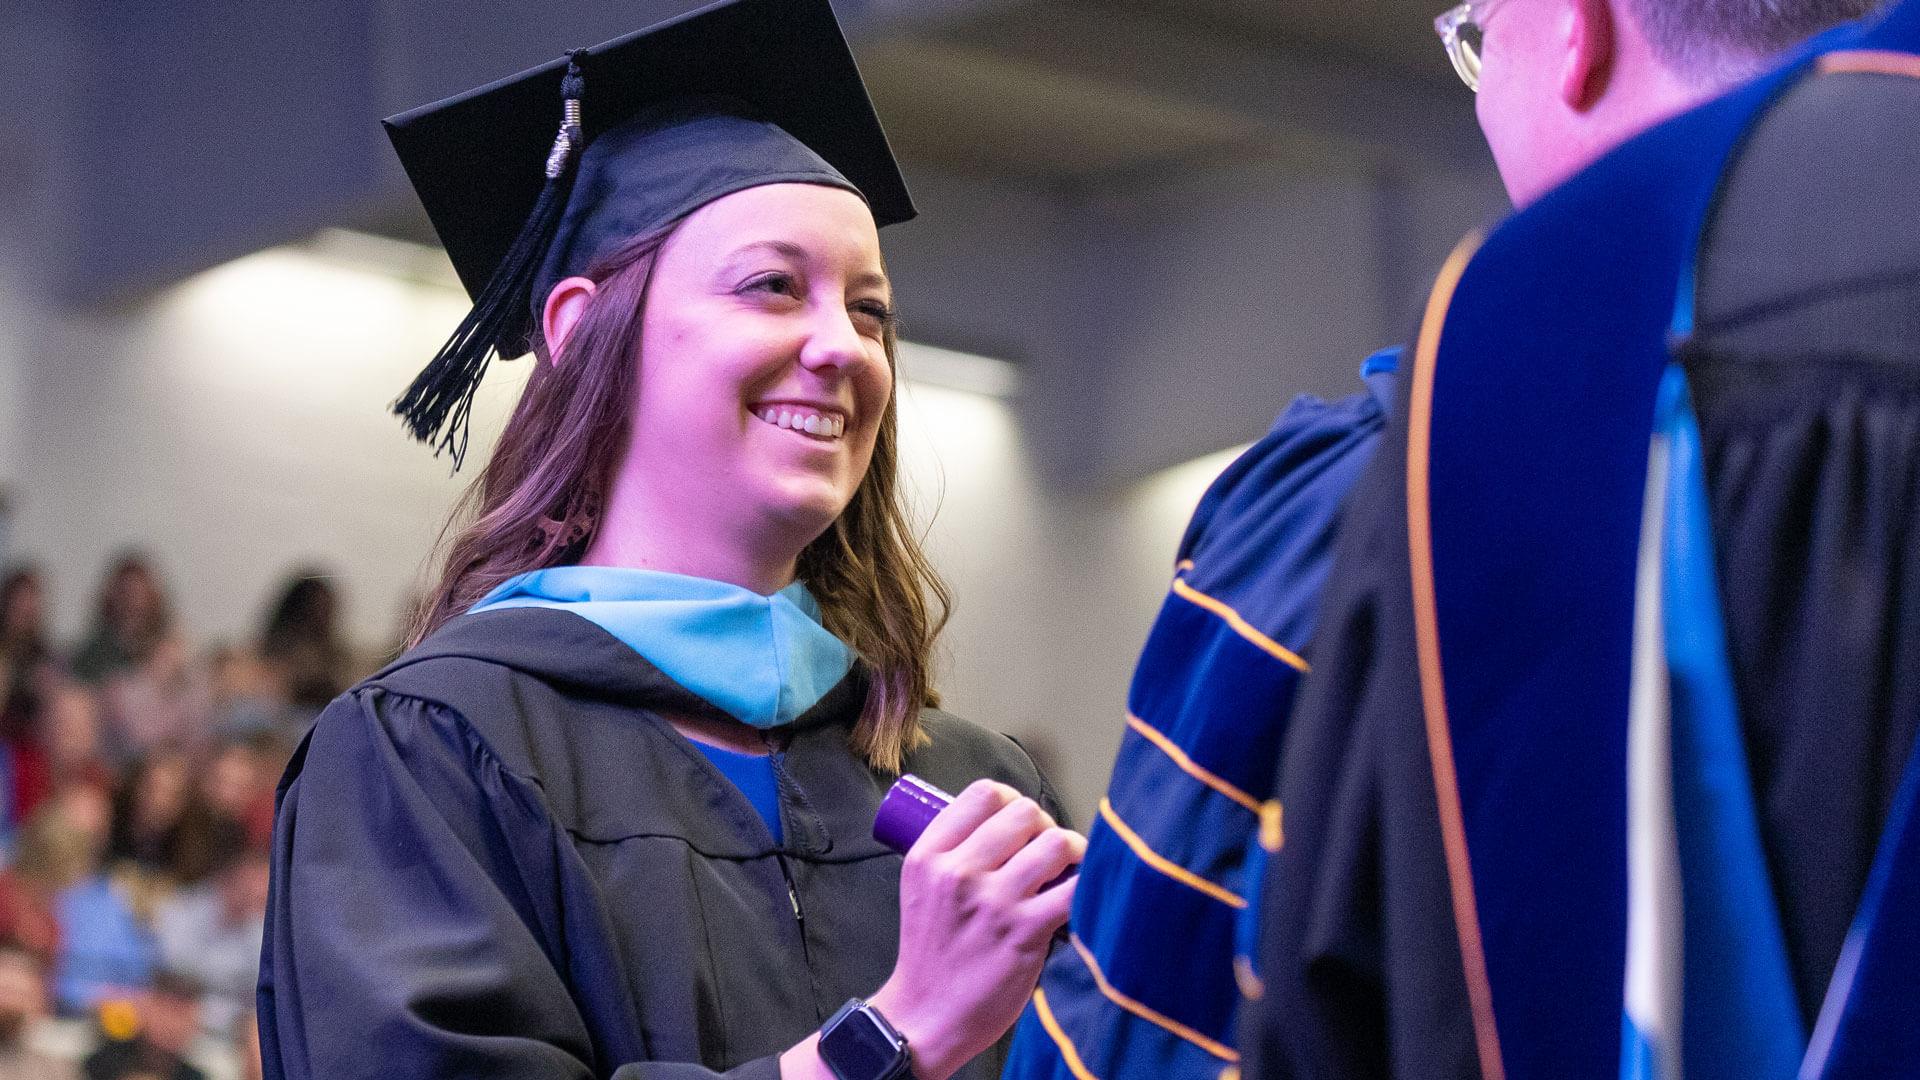 master's in education graduate receives diploma